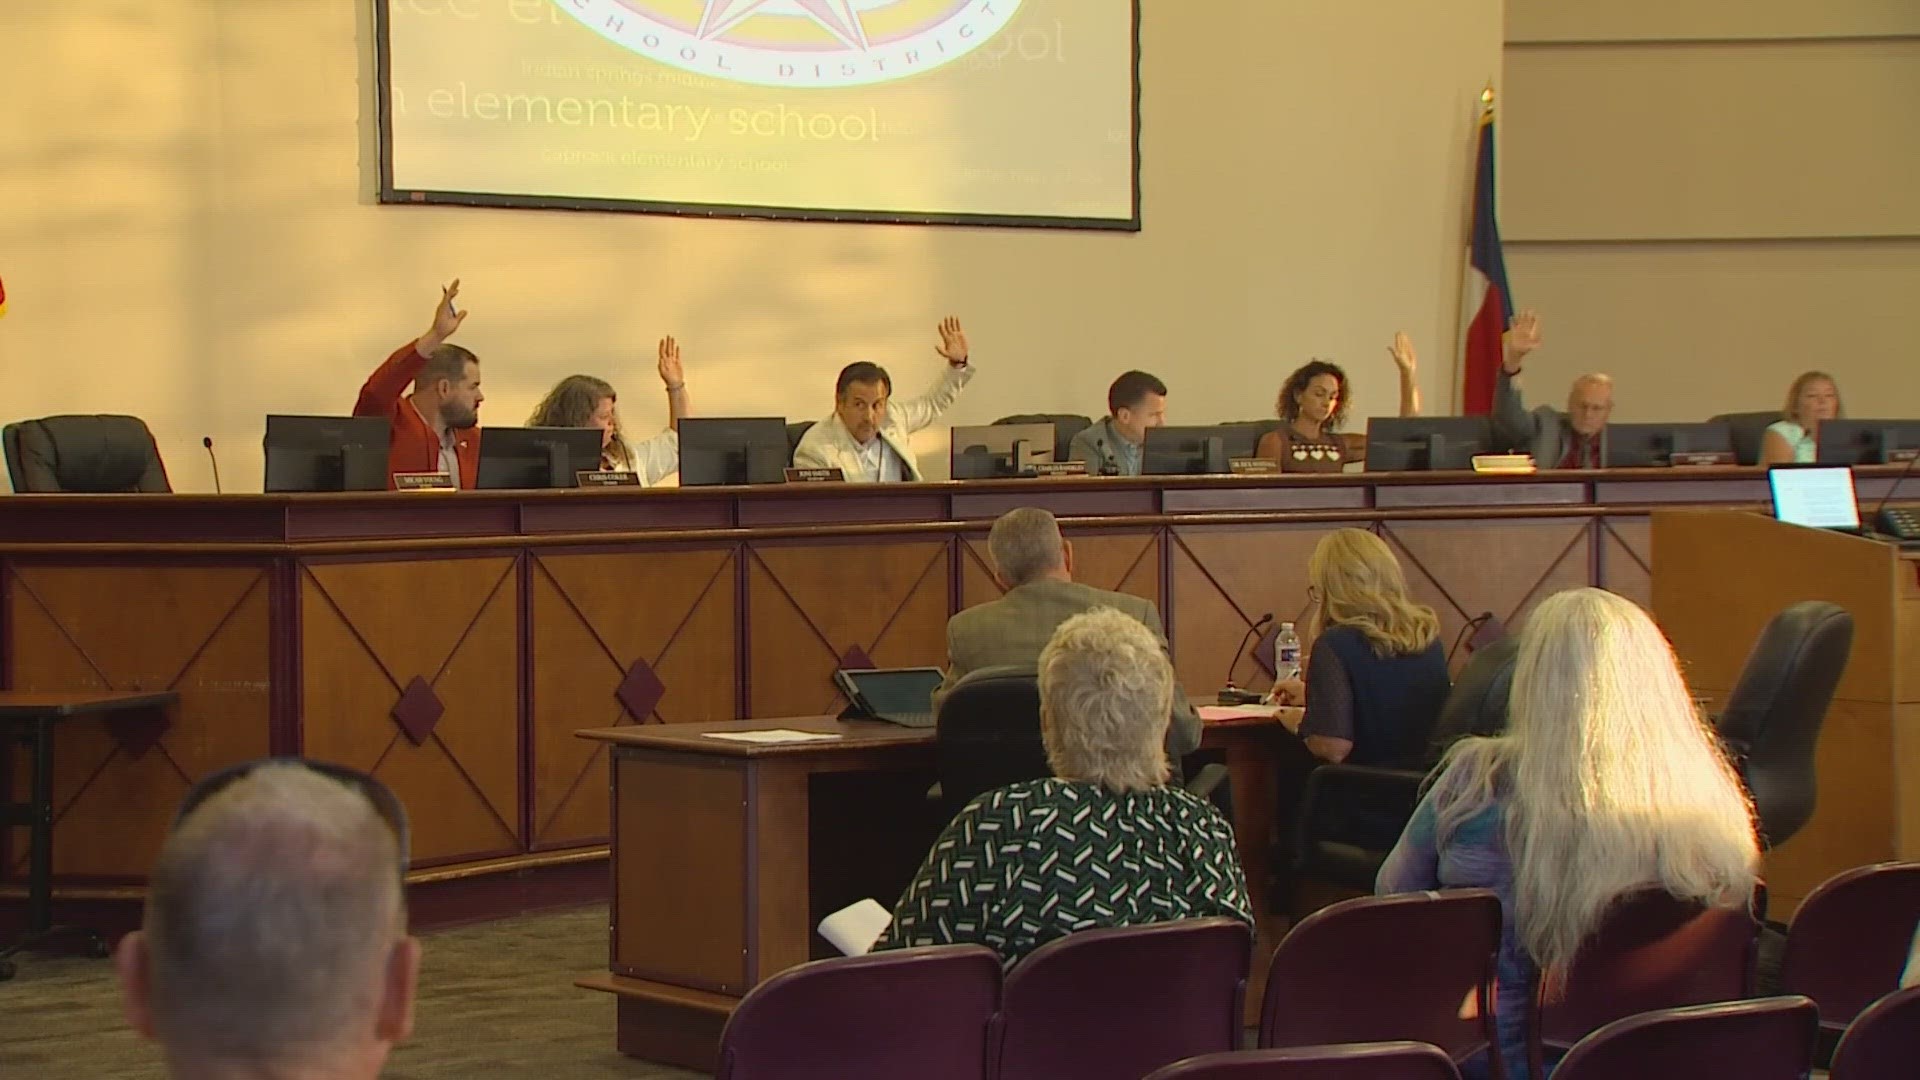 People for and against new gender-based policy changes packed the special Keller ISD school board meeting Wednesday night to voice their concerns.